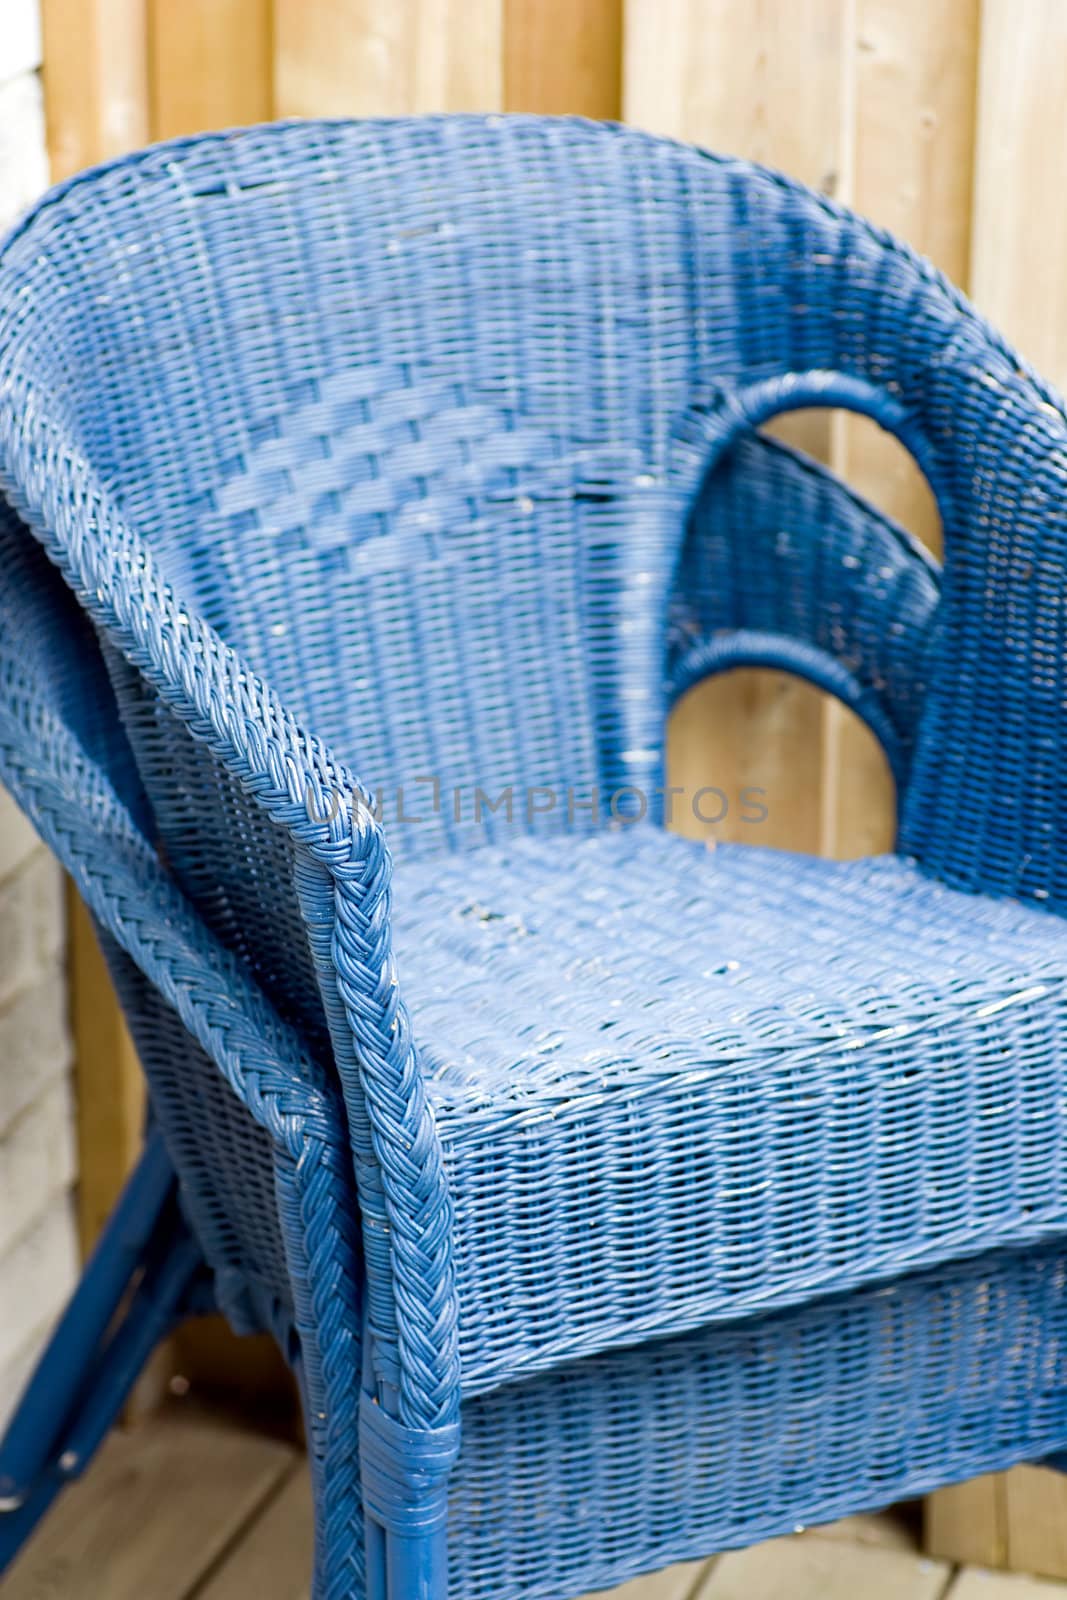 Two blue rattan outdoor deck chairs, stacked.